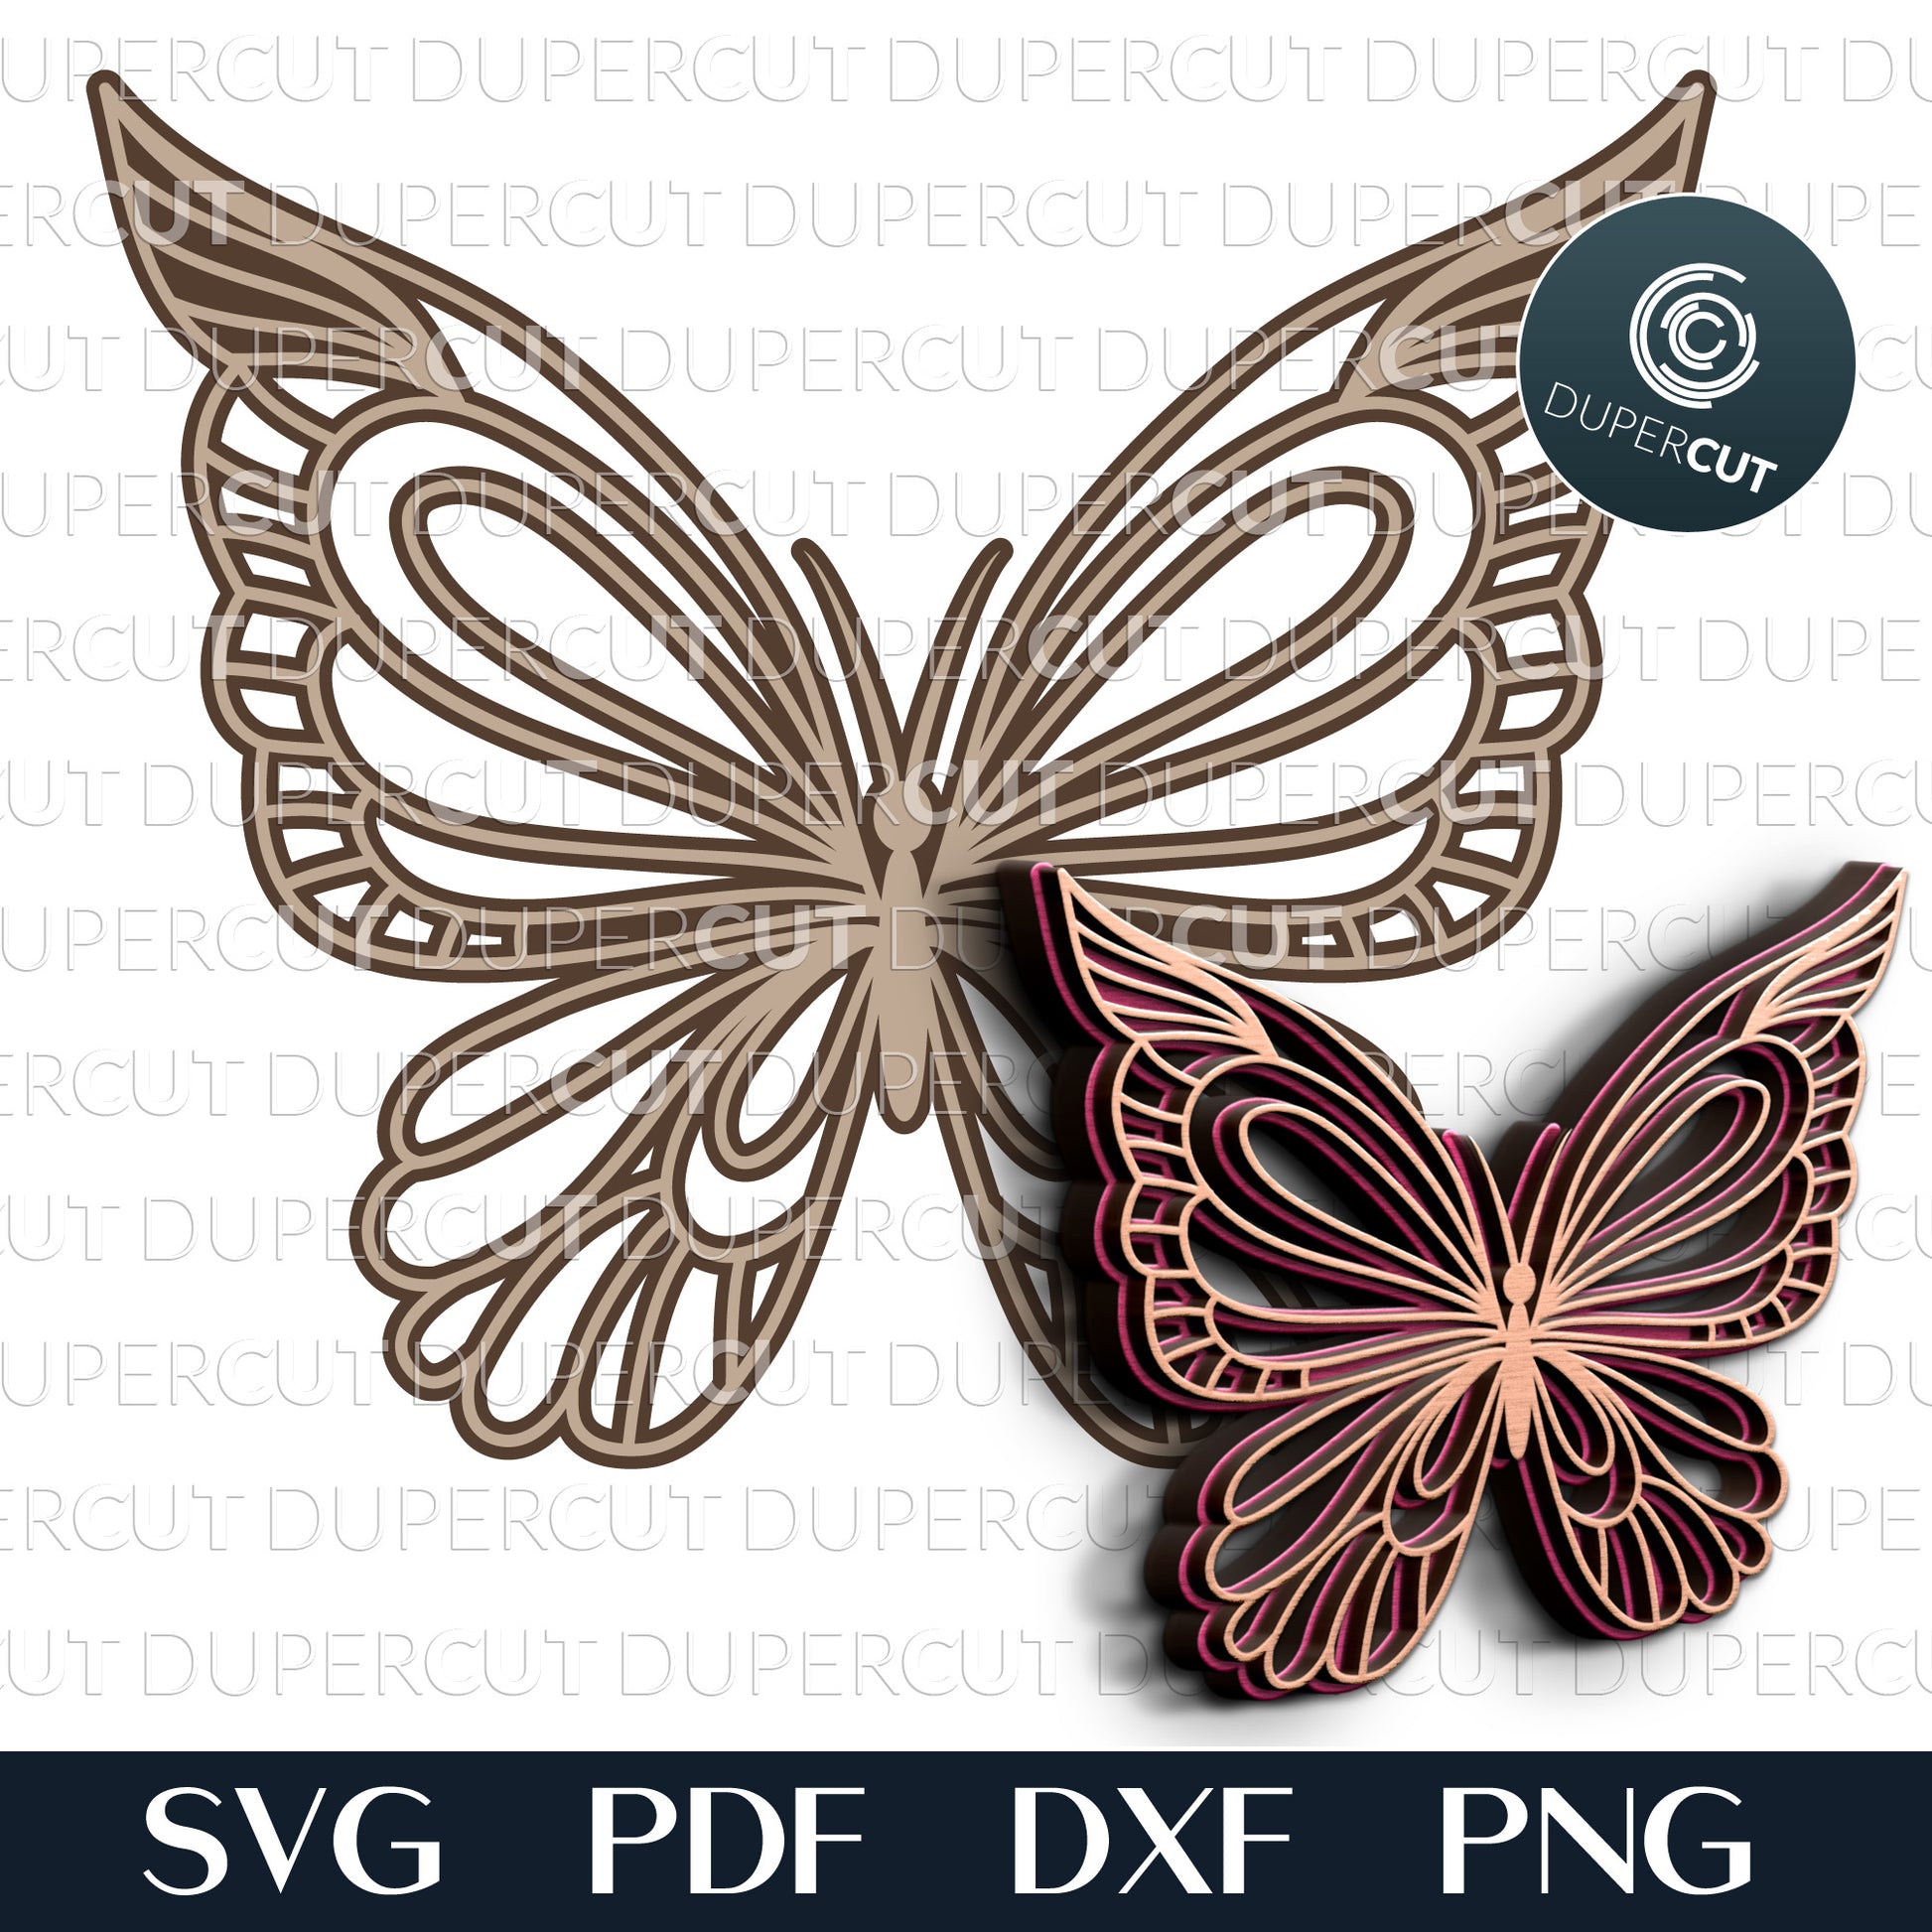 Butterfly - layered cutting template - SVG PDF DXF vector files for laser cutting with Glowforge, Cricut, Silhouette Cameo, CNC plasma machines by DuperCut